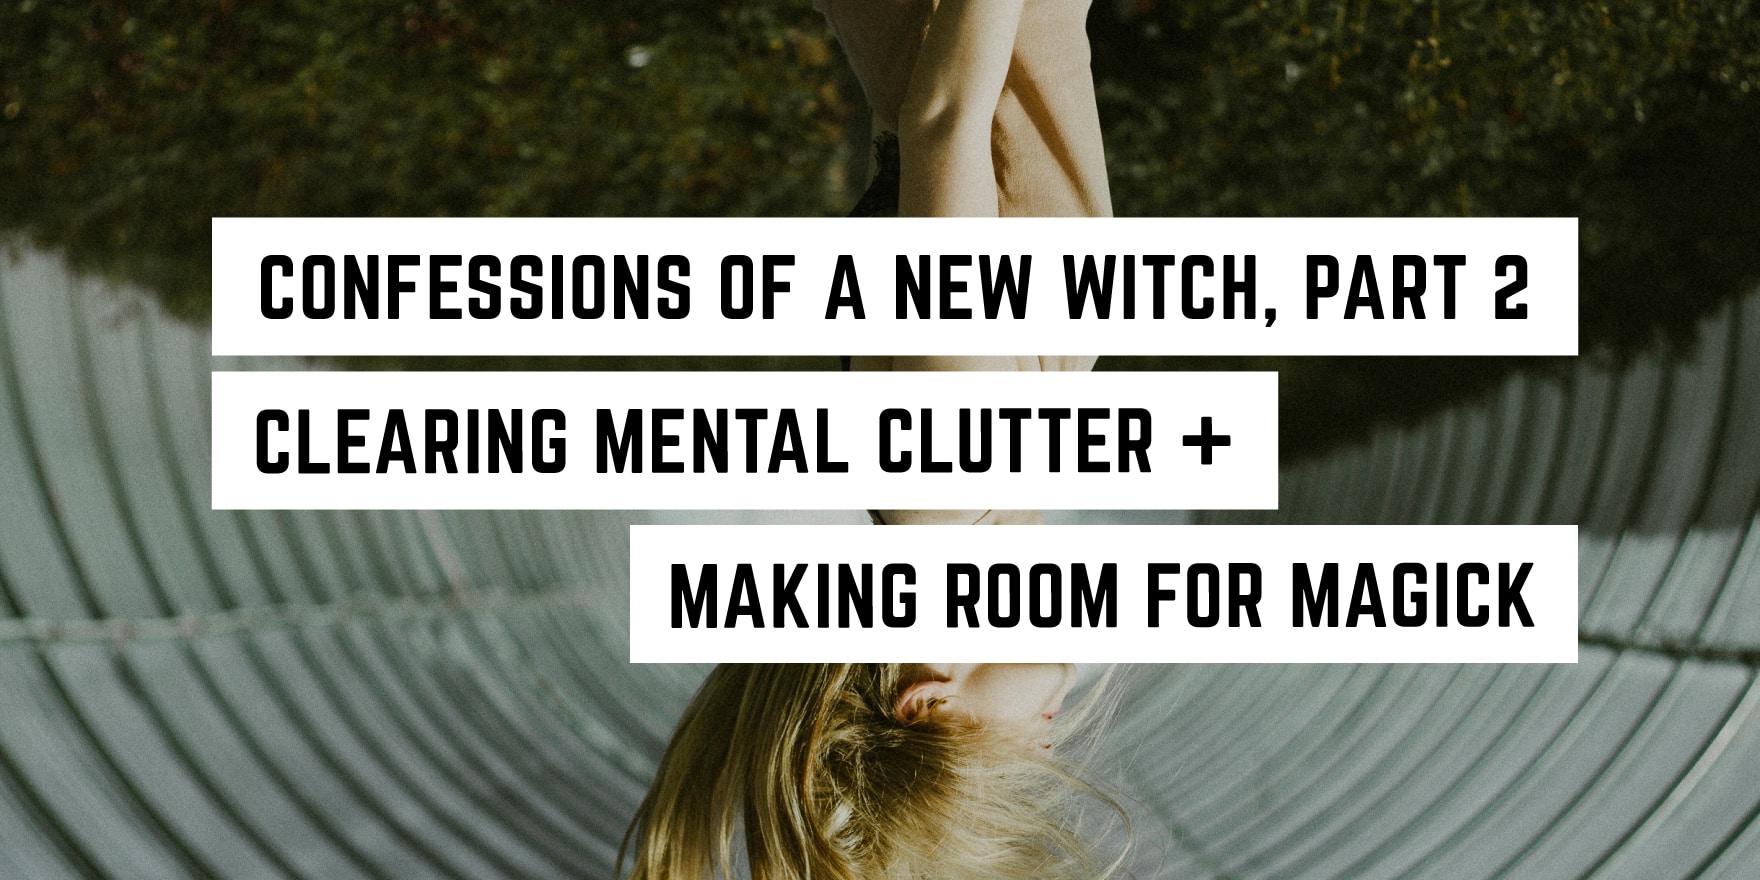 Confessions Of A New Witch, Part 2: Clearing Mental Clutter